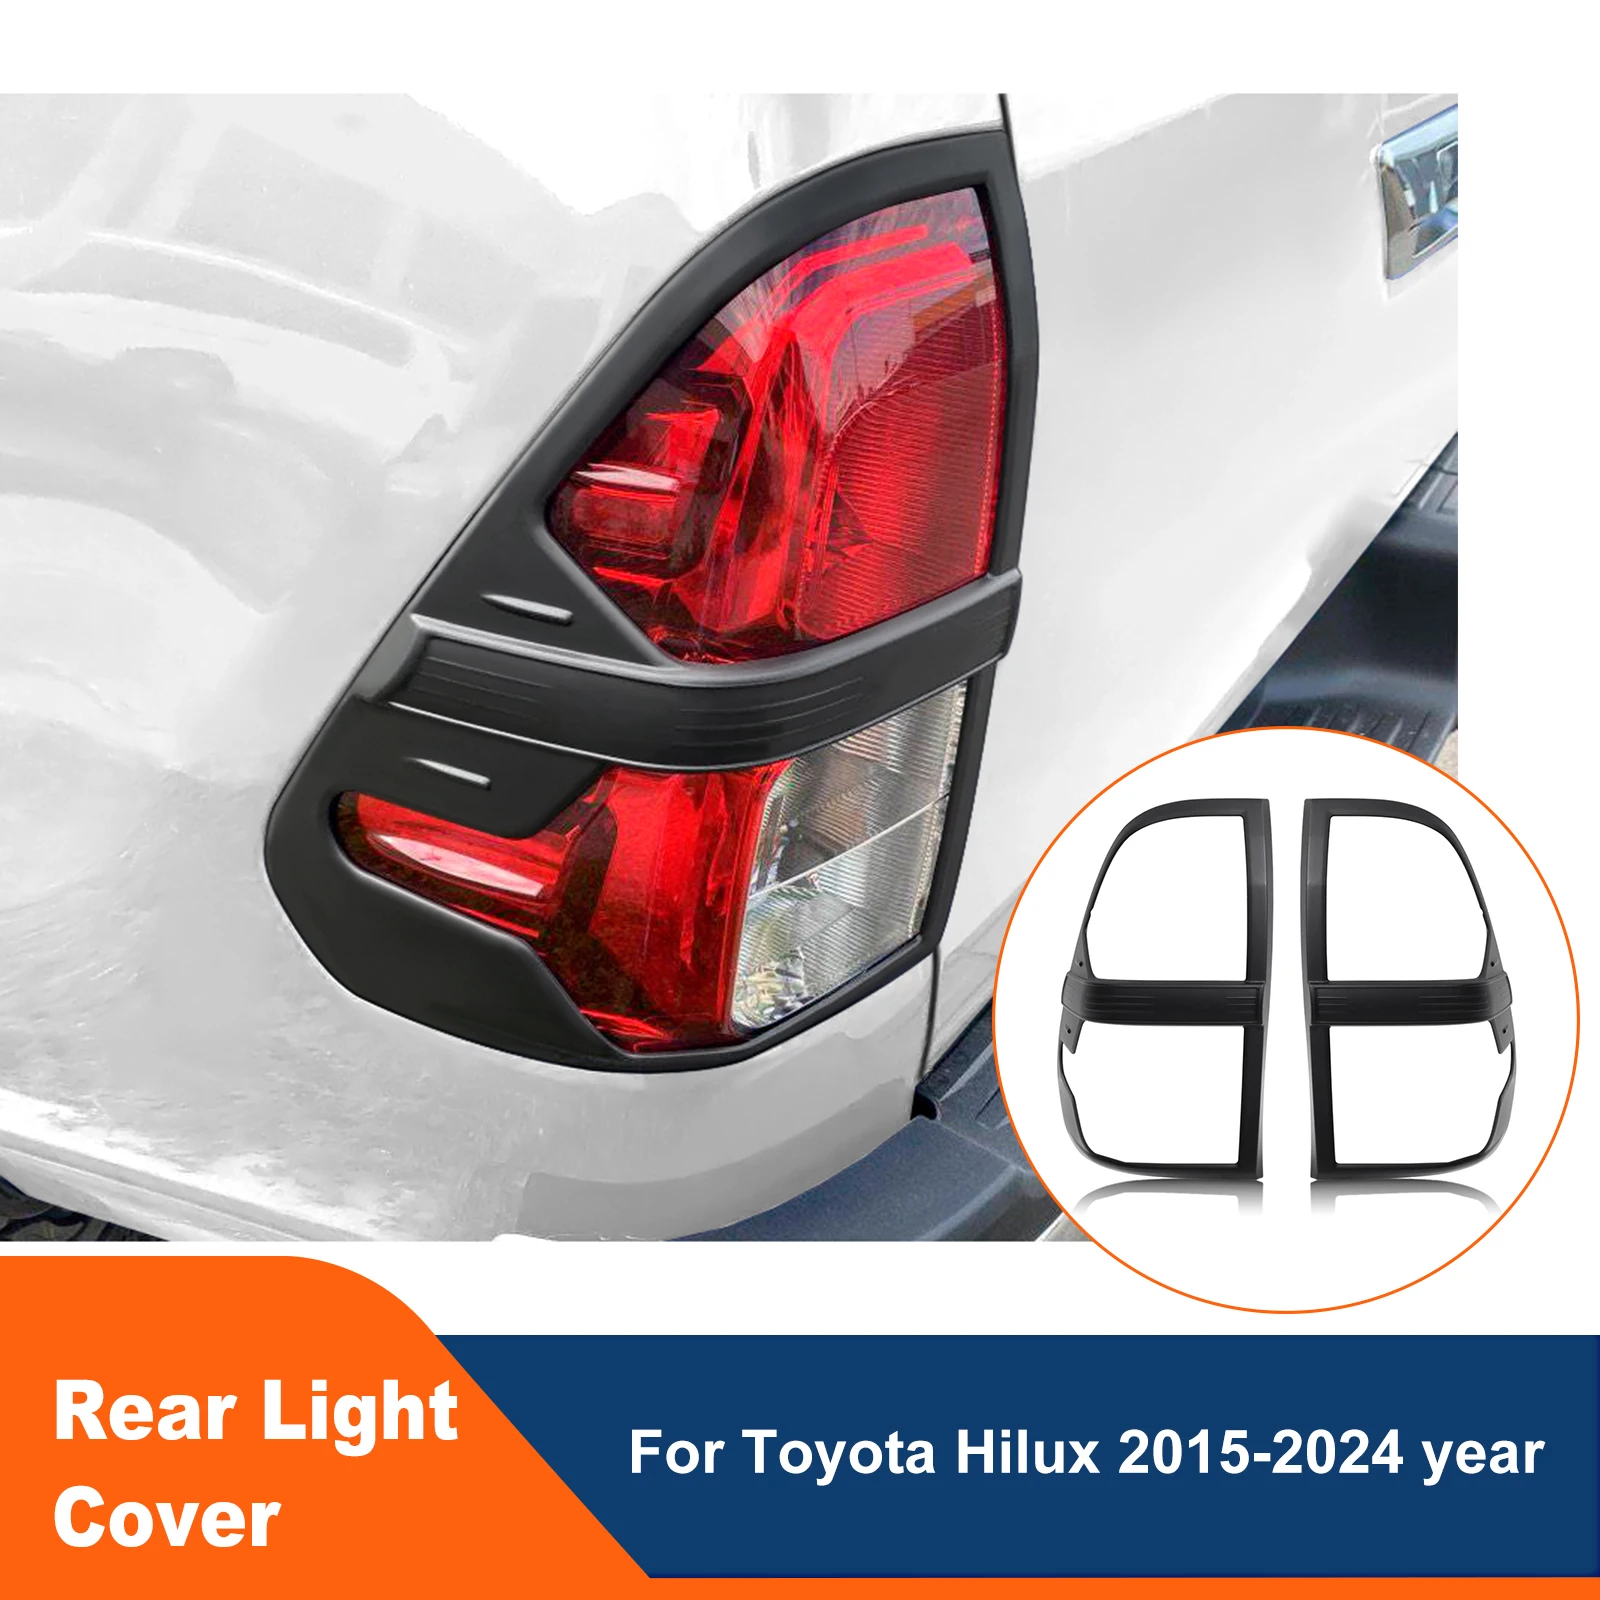 

Matte Black Tail Light Cover Protector For Toyota Hilux Revo 2015-2024 year Models Decorative Rear Lamp Shades 2Pcs/Set